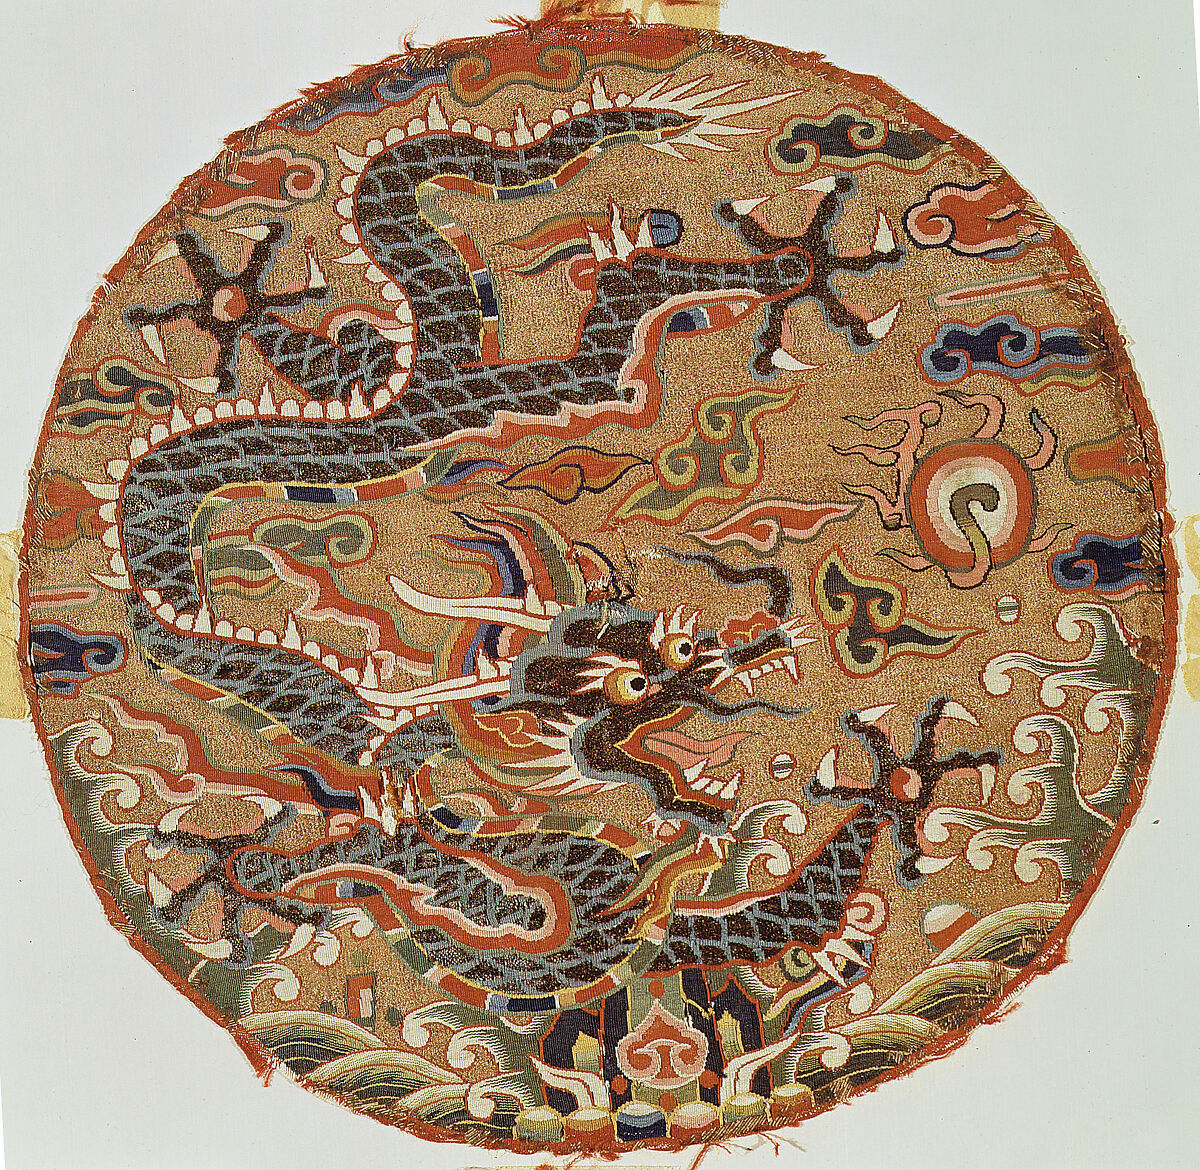 Medallion with Five-Clawed Dragon (long), Silk, metallic thread, and peacock feather tapestry (kesi), China 